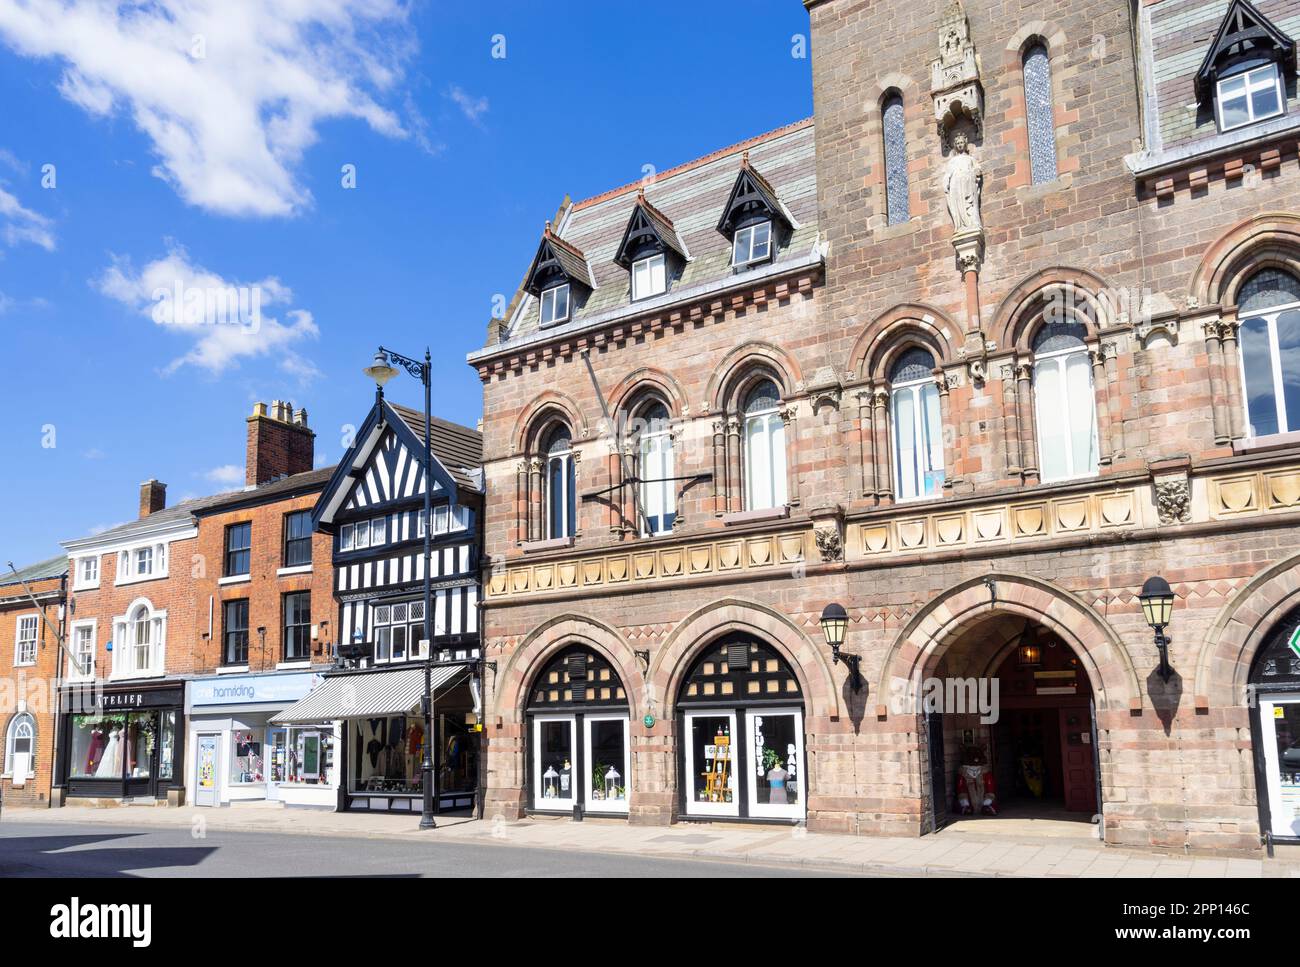 Congleton Town Hall on the High street Congleton town centre Congleton Cheshire East England UK GB Europe Stock Photo